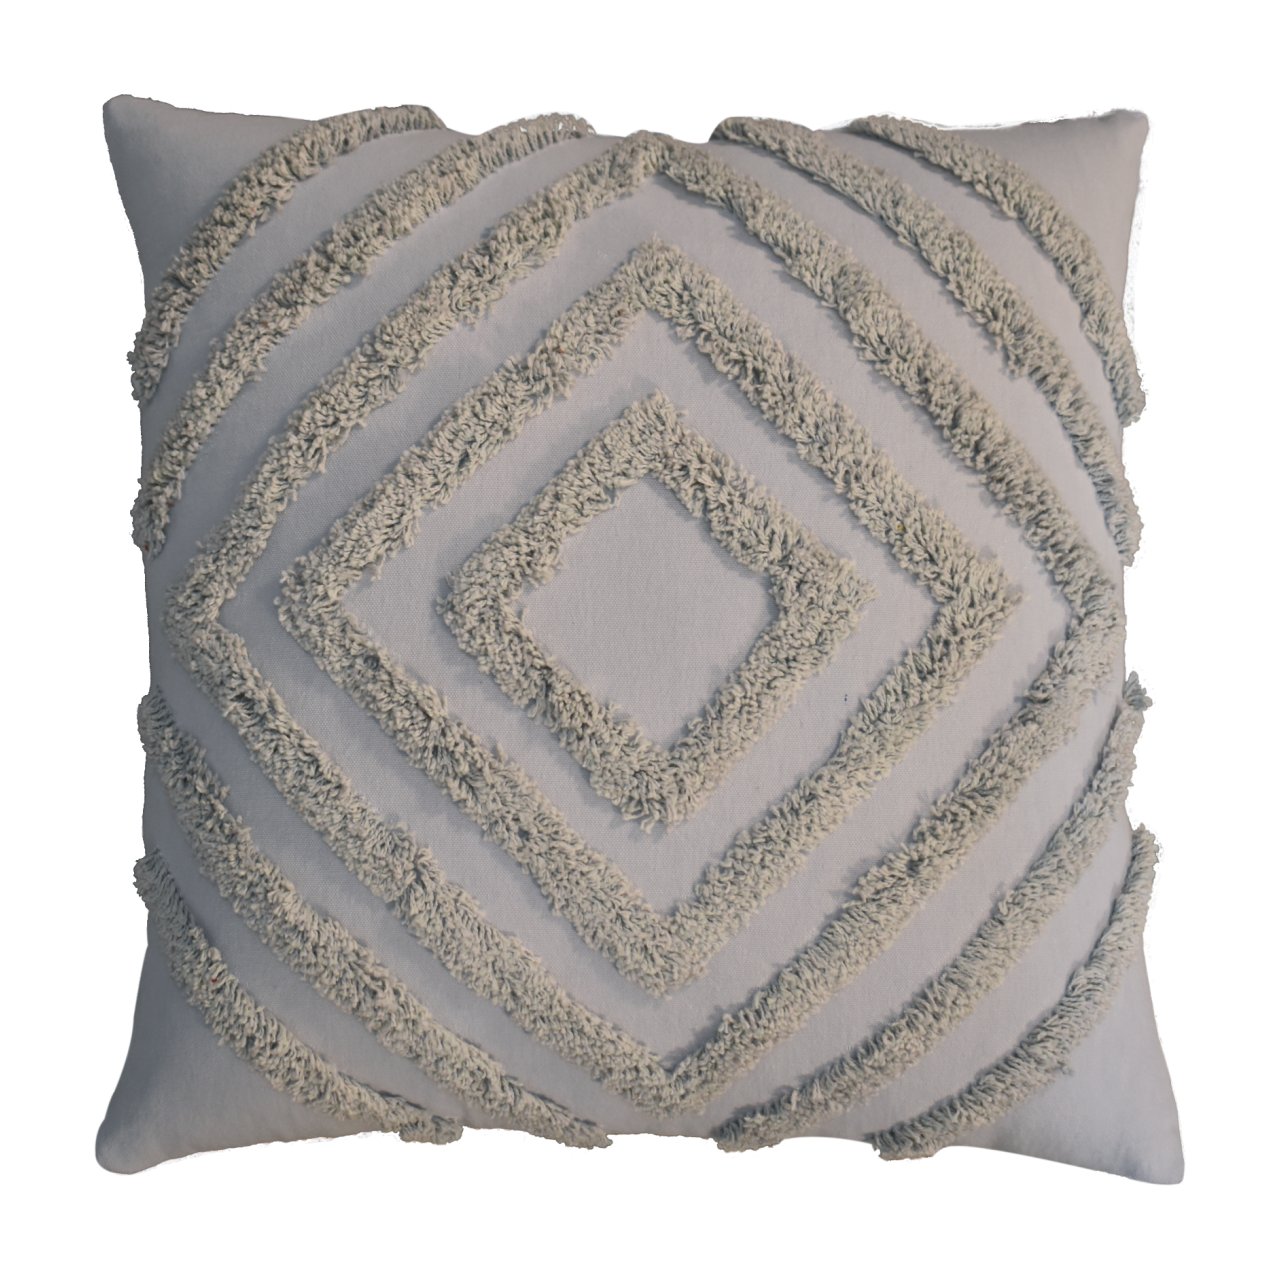 View Tacy Grey Cushion Set of 2 information